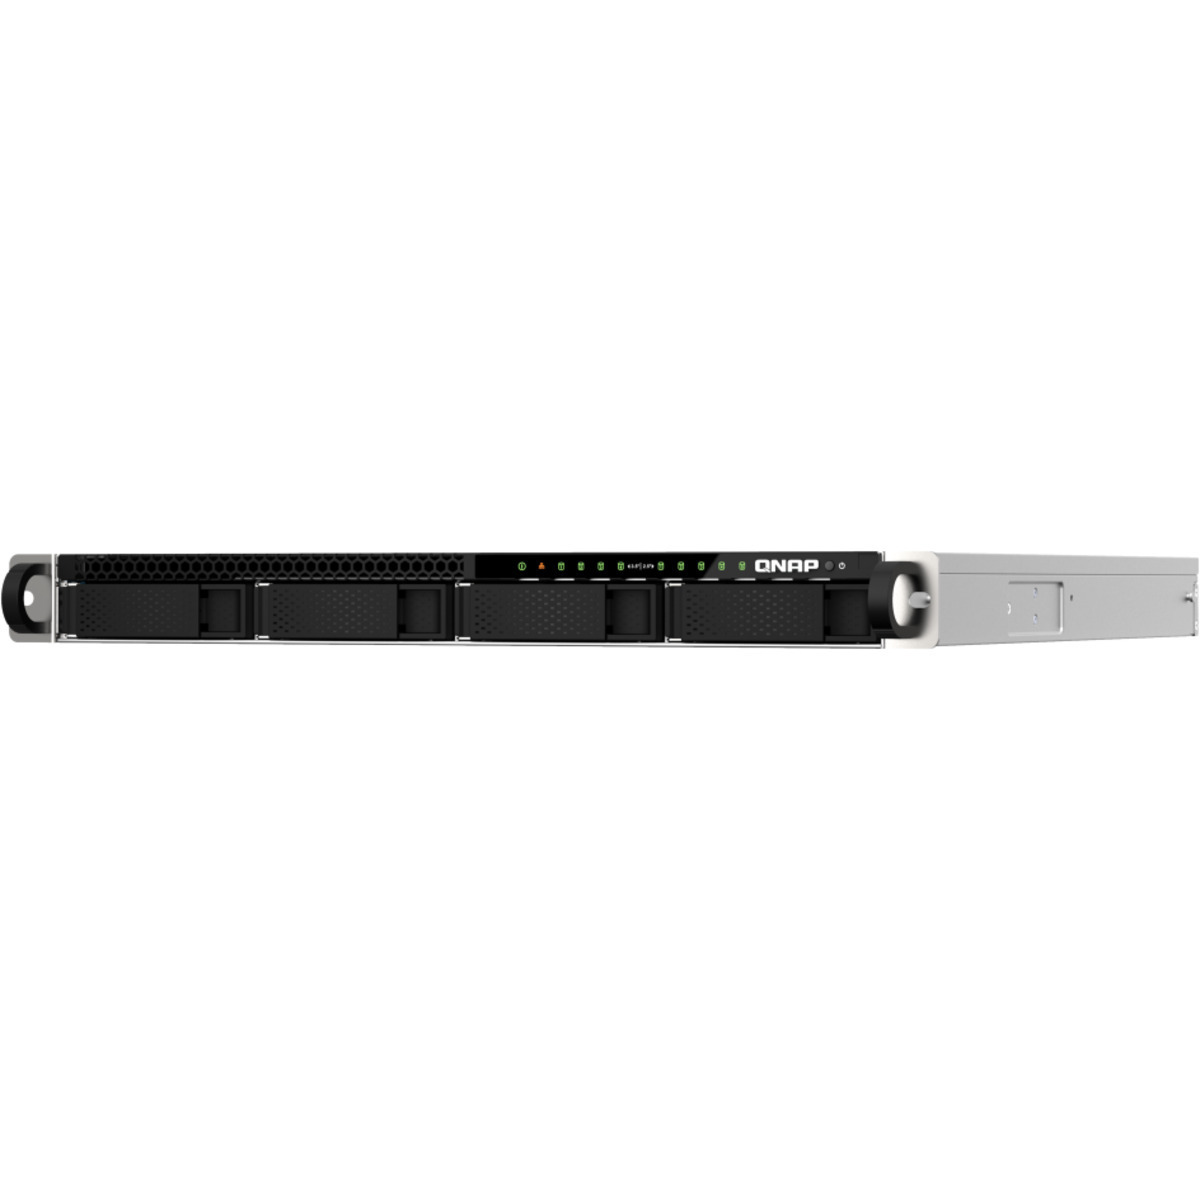 QNAP TS-h987XU-RP QuTS hero Edition 48tb 4-Bay RackMount Large Business / Enterprise NAS - Network Attached Storage Device 3x16tb Seagate IronWolf ST16000VN001 3.5 7200rpm SATA 6Gb/s HDD NAS Class Drives Installed - Burn-In Tested TS-h987XU-RP QuTS hero Edition